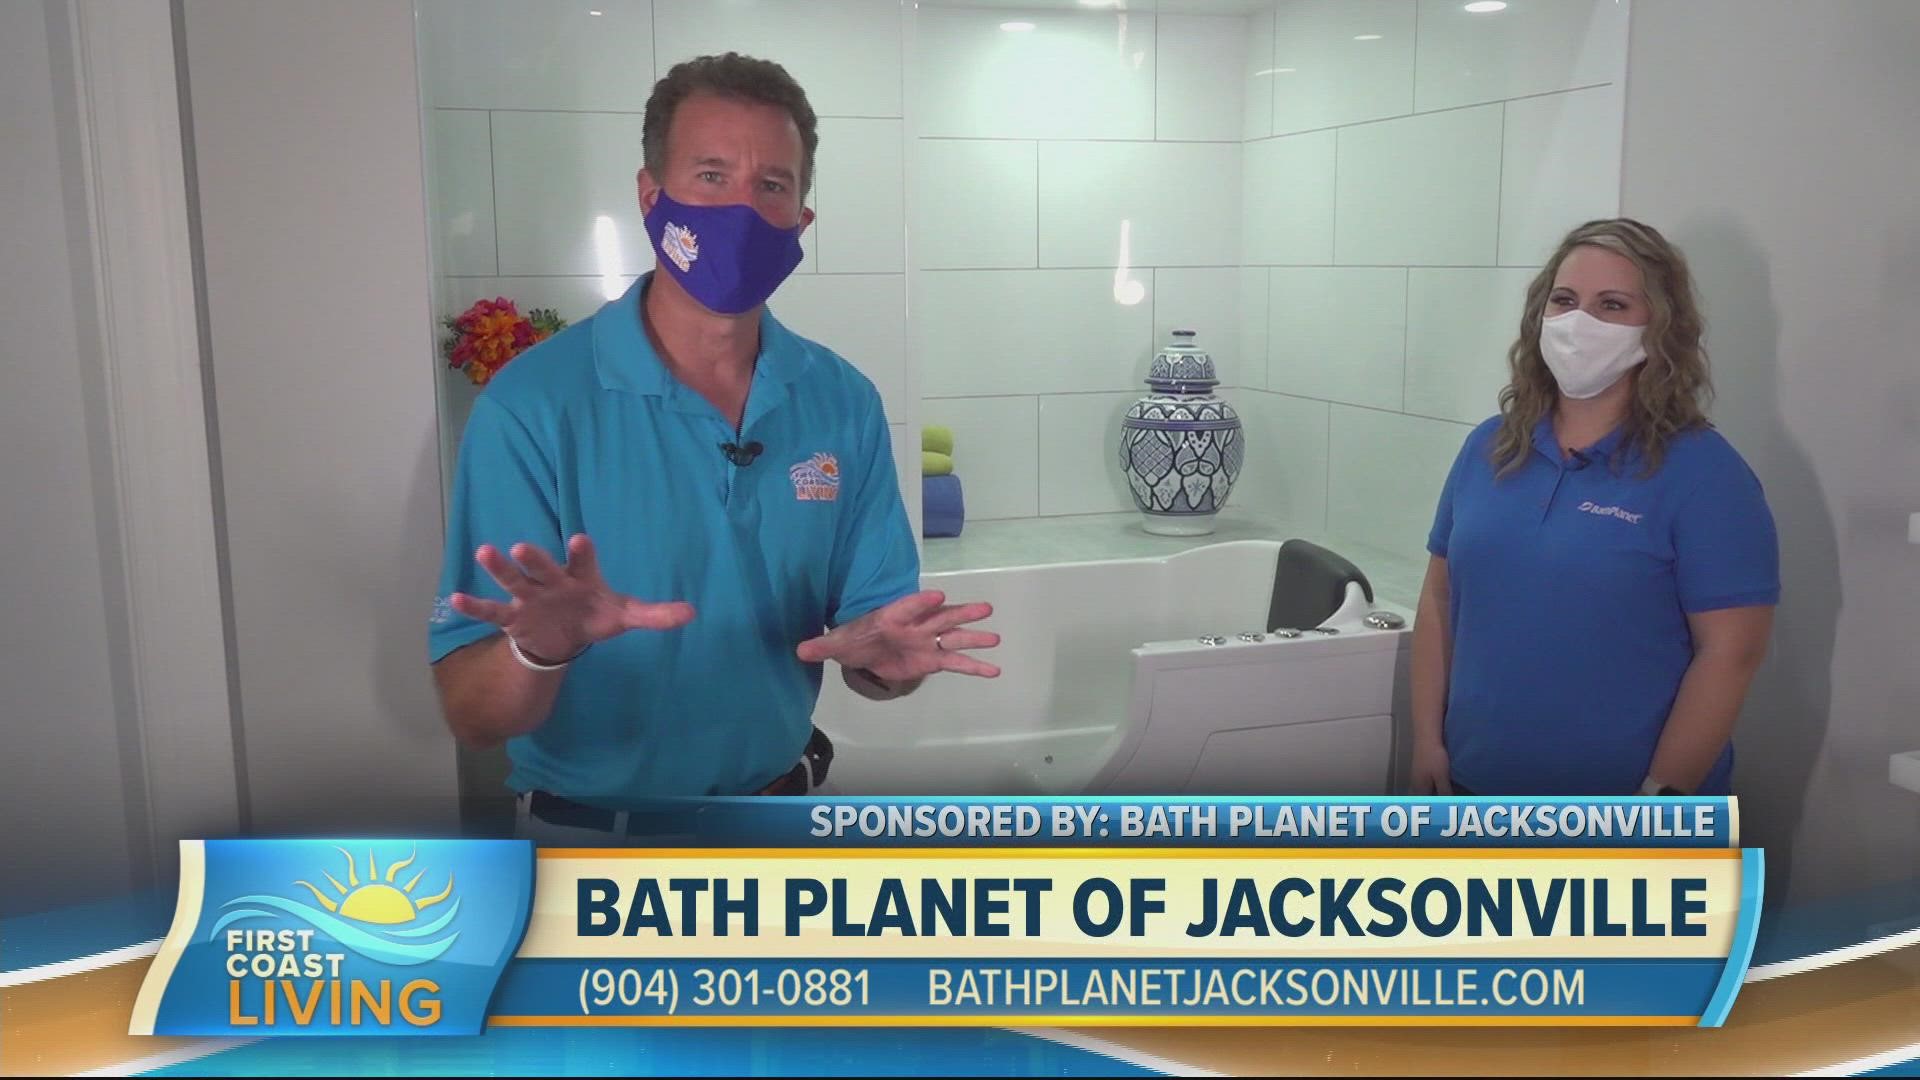 Bath Planet of Jacksonville owner, Shannon Harrington shows us therapeutic, comfortable and safe options for seniors including walk-in tubs.